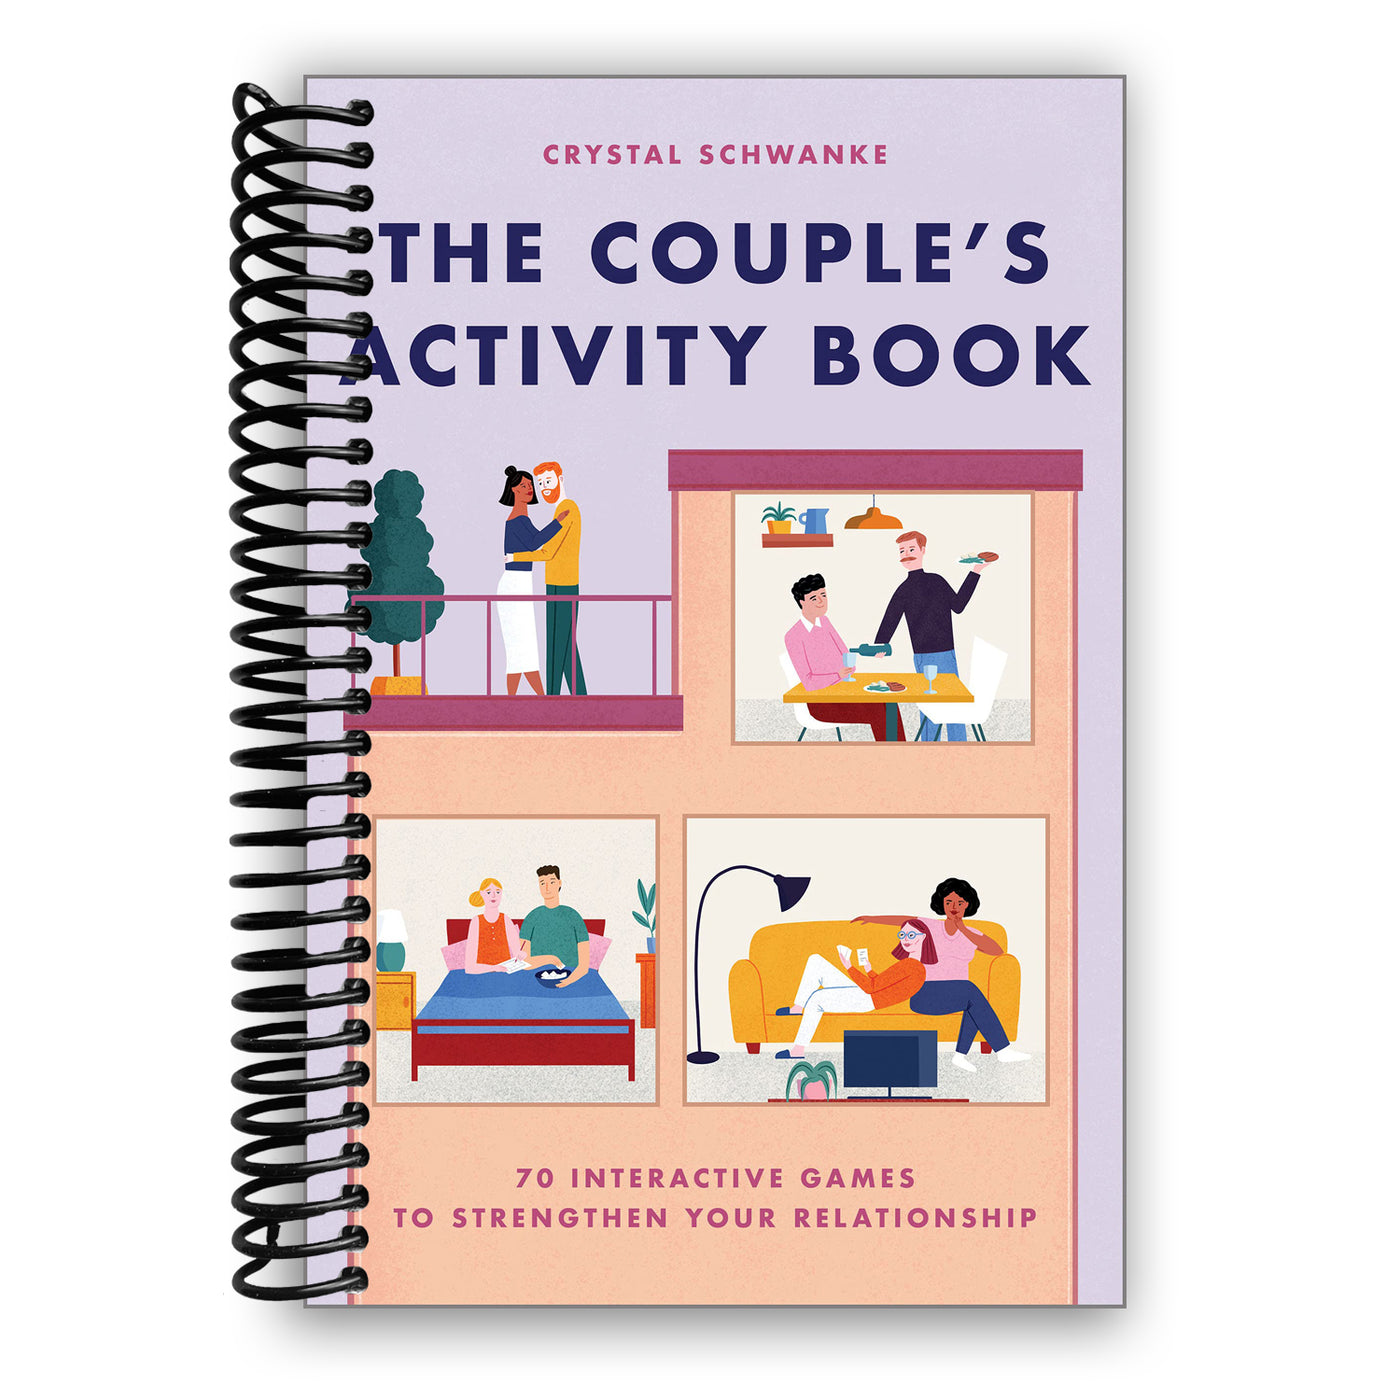 The Ultimate Fun Book for Couples: 60 Exciting and Lighthearted